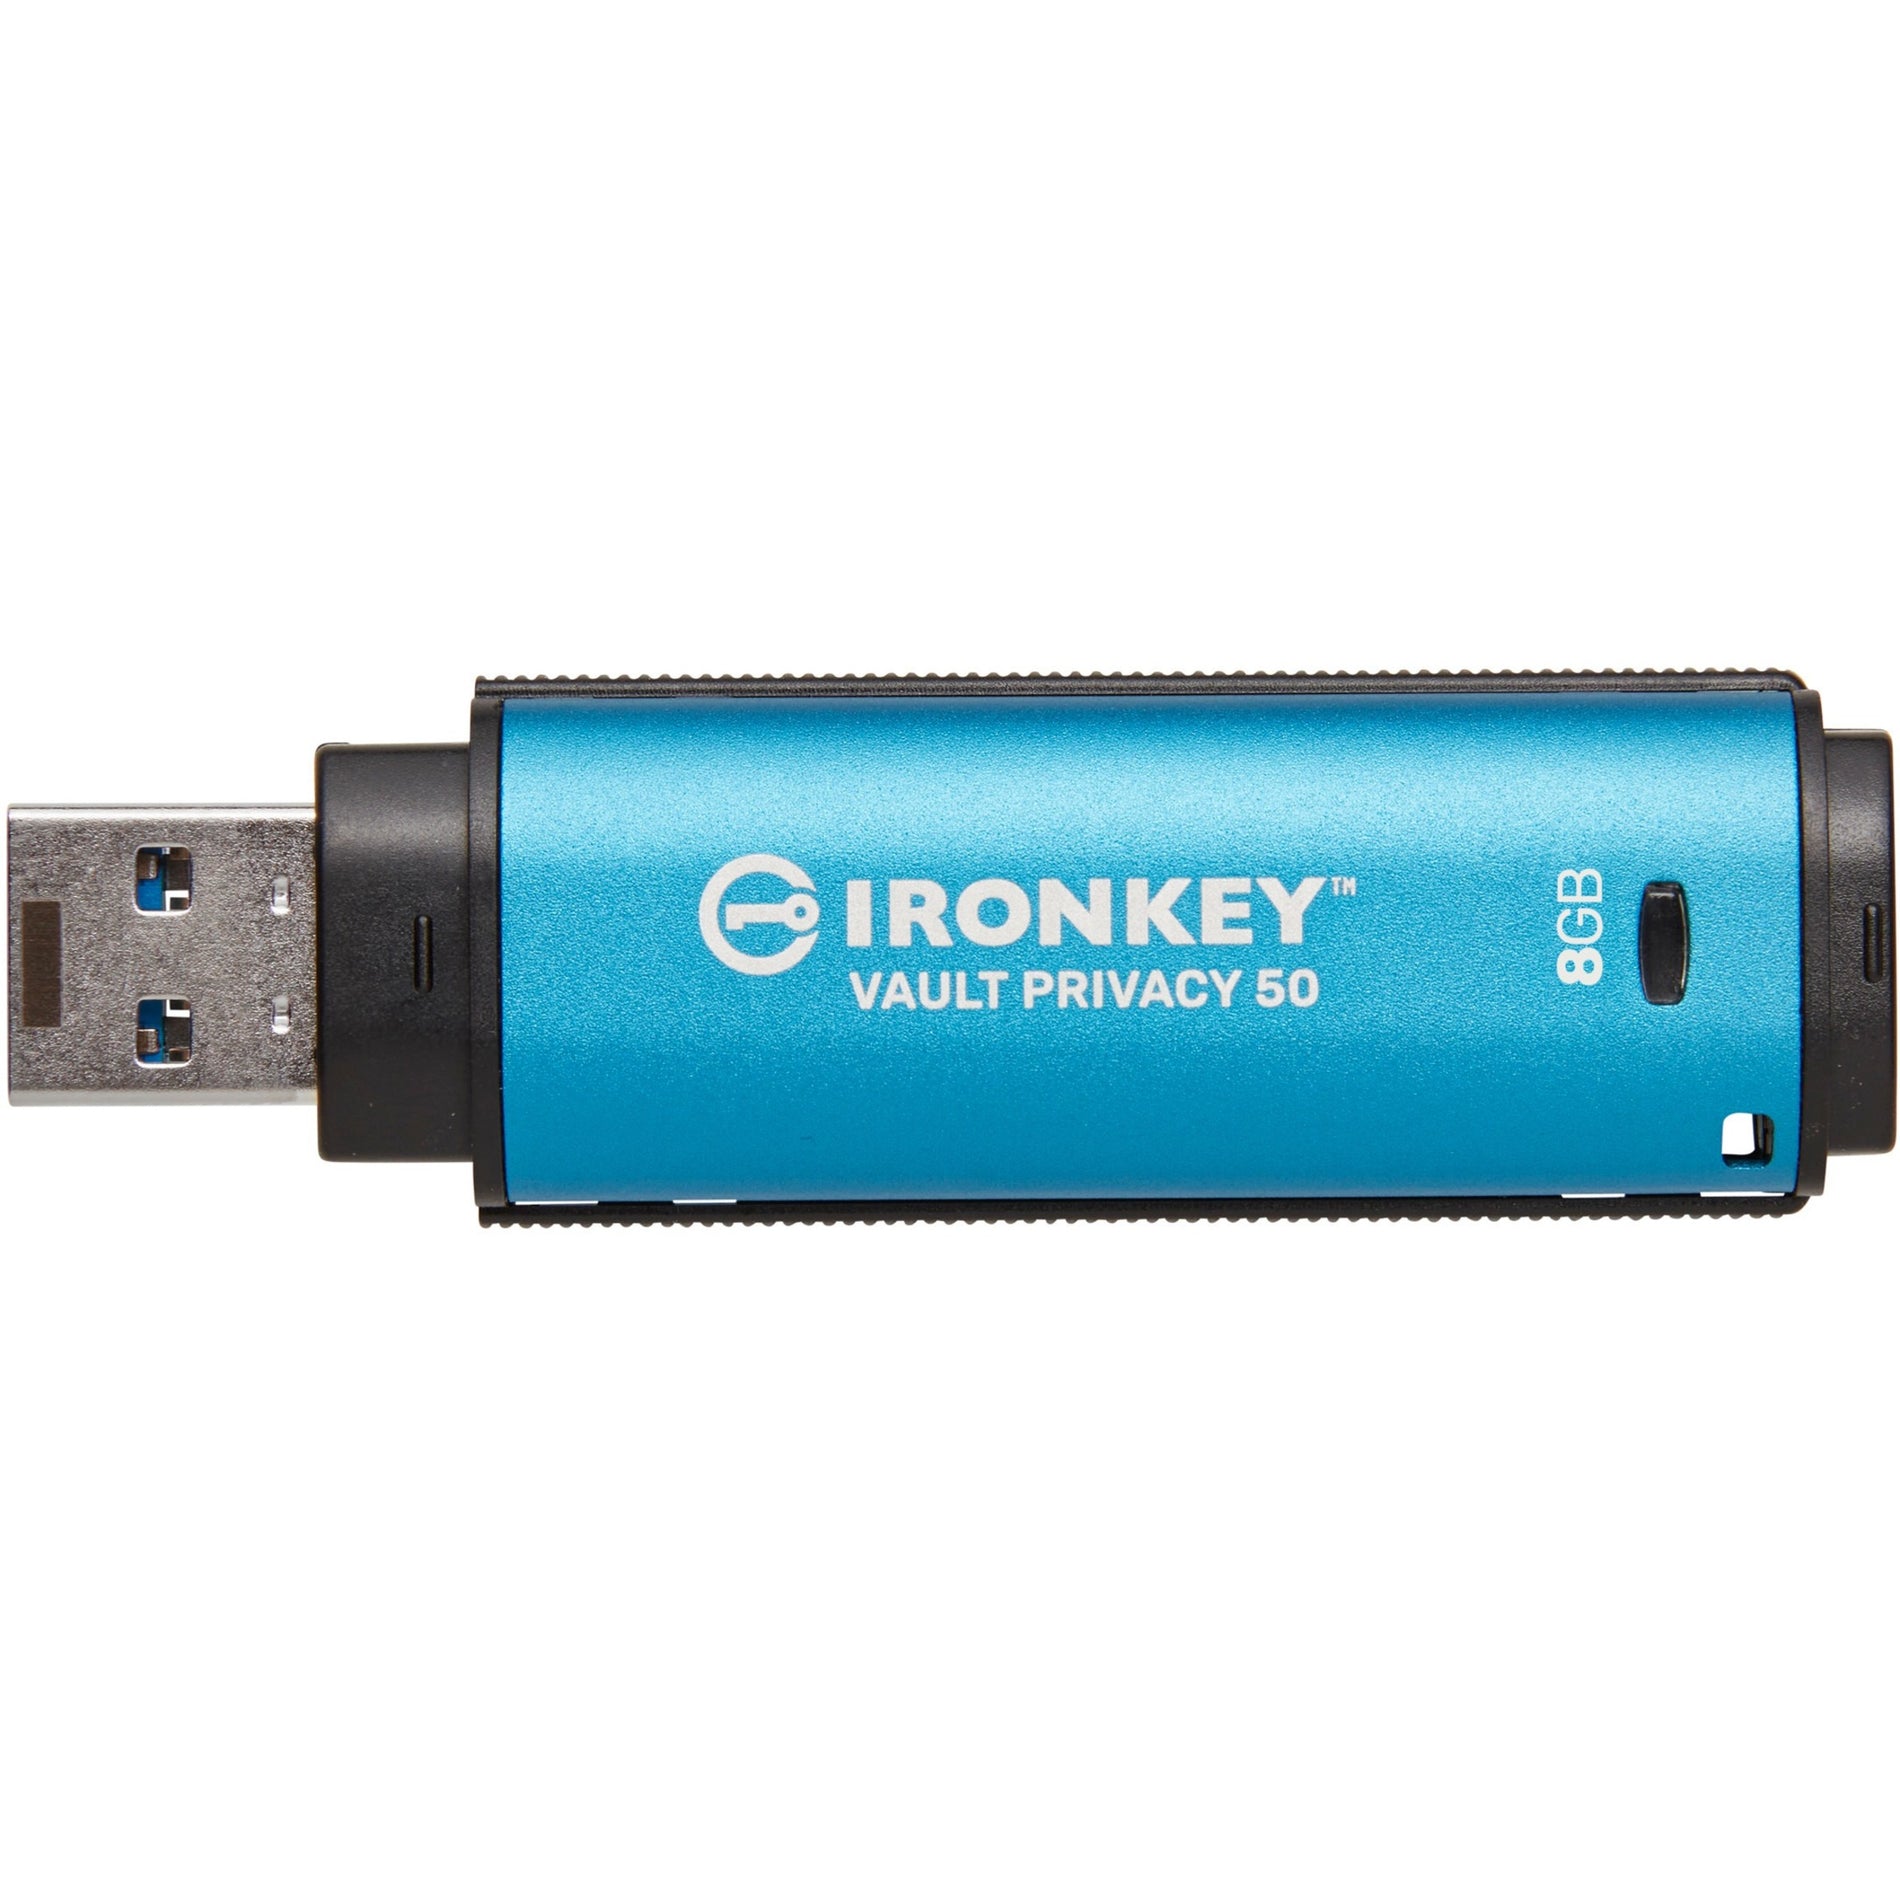 IronKey IKVP50/8GB Vault Privacy 50 Series 8GB USB 3.2 (Gen 1) Type A Flash Drive, Password Protection, 256-bit AES Encryption